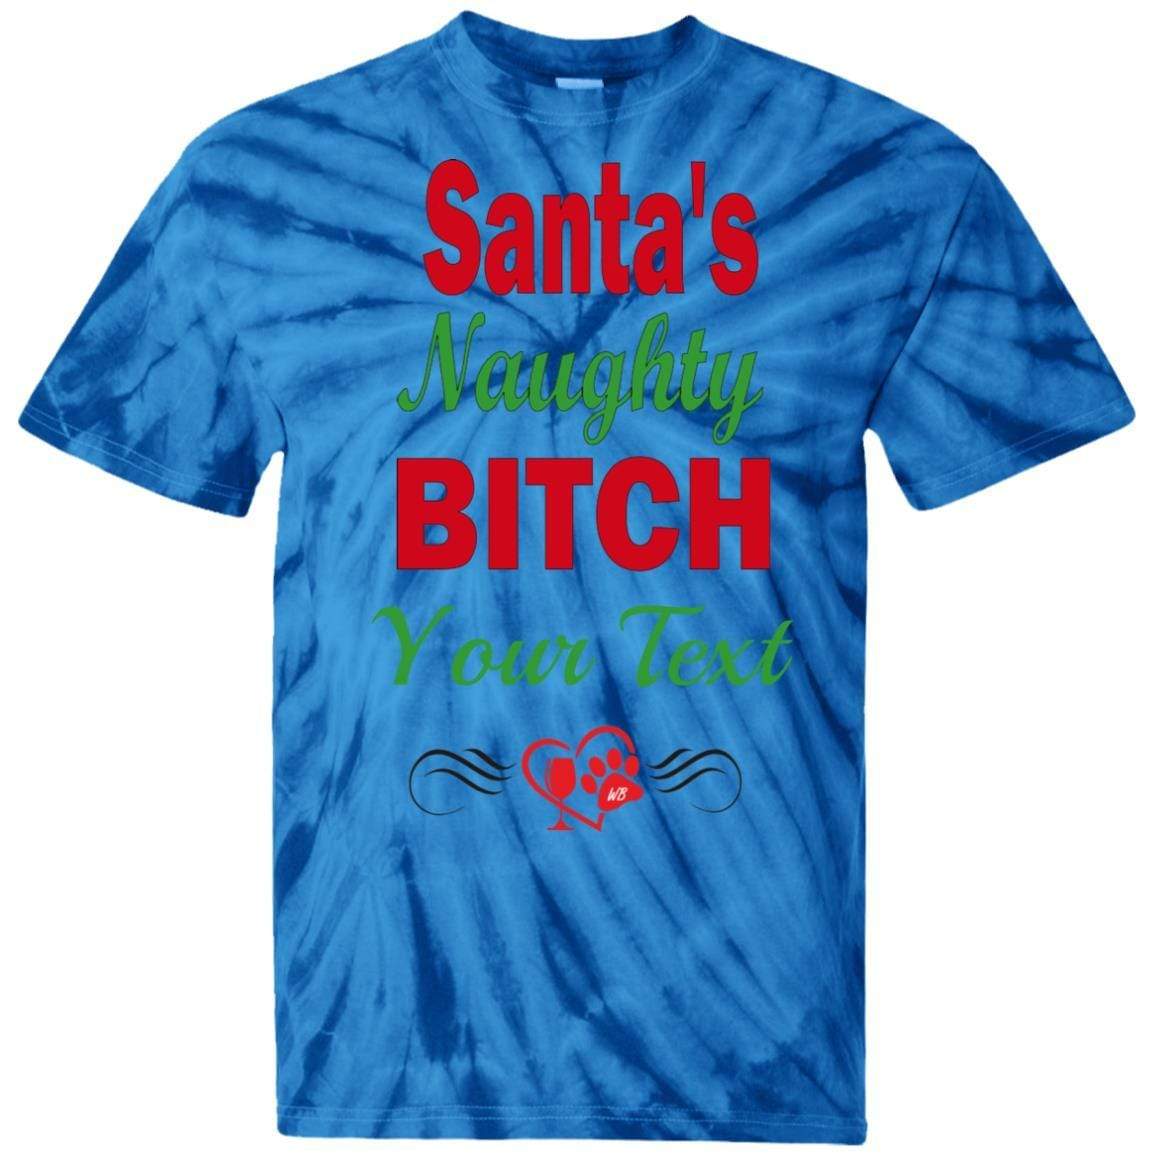 T-Shirts SpiderRoyal / S WineyBitches.co Santa's Naughty Bitch-Personalized Tie Dye T-Shirt WineyBitchesCo